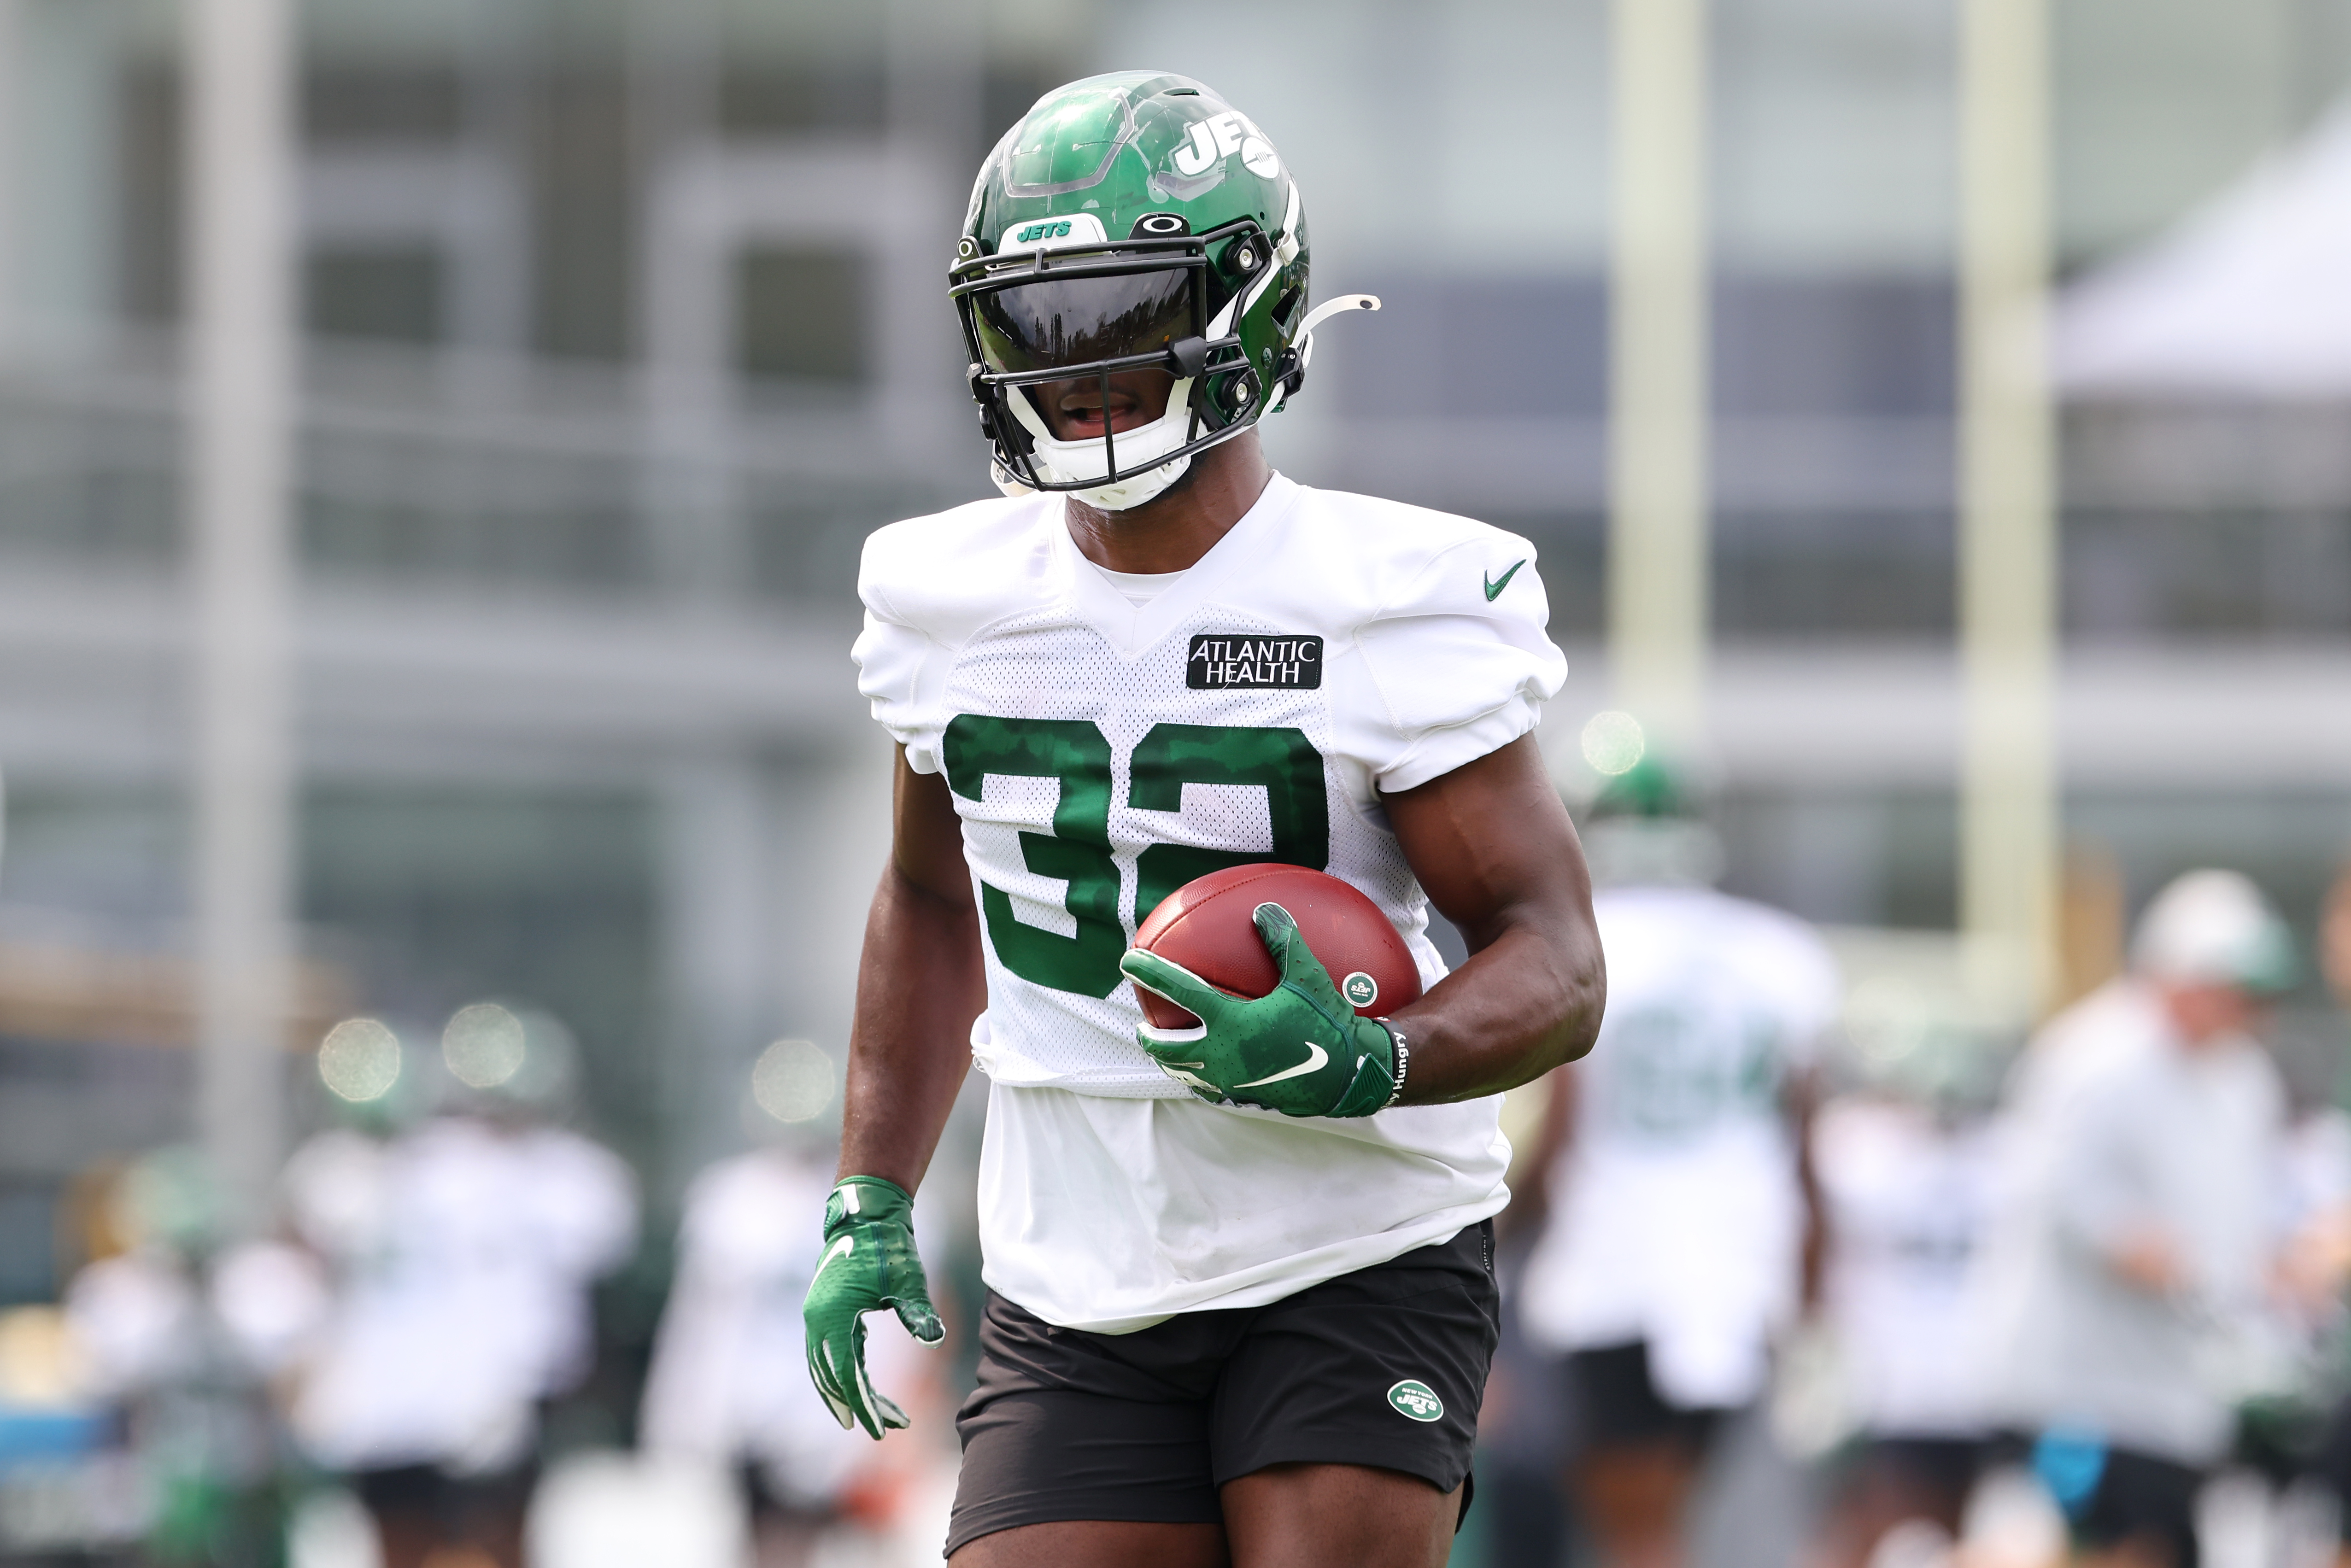 Michael Carter #32 of the New York Jets works out during a morning practice at Atlantic Health Jets Training Center on July 29, 2021 in Florham Park, New Jersey.